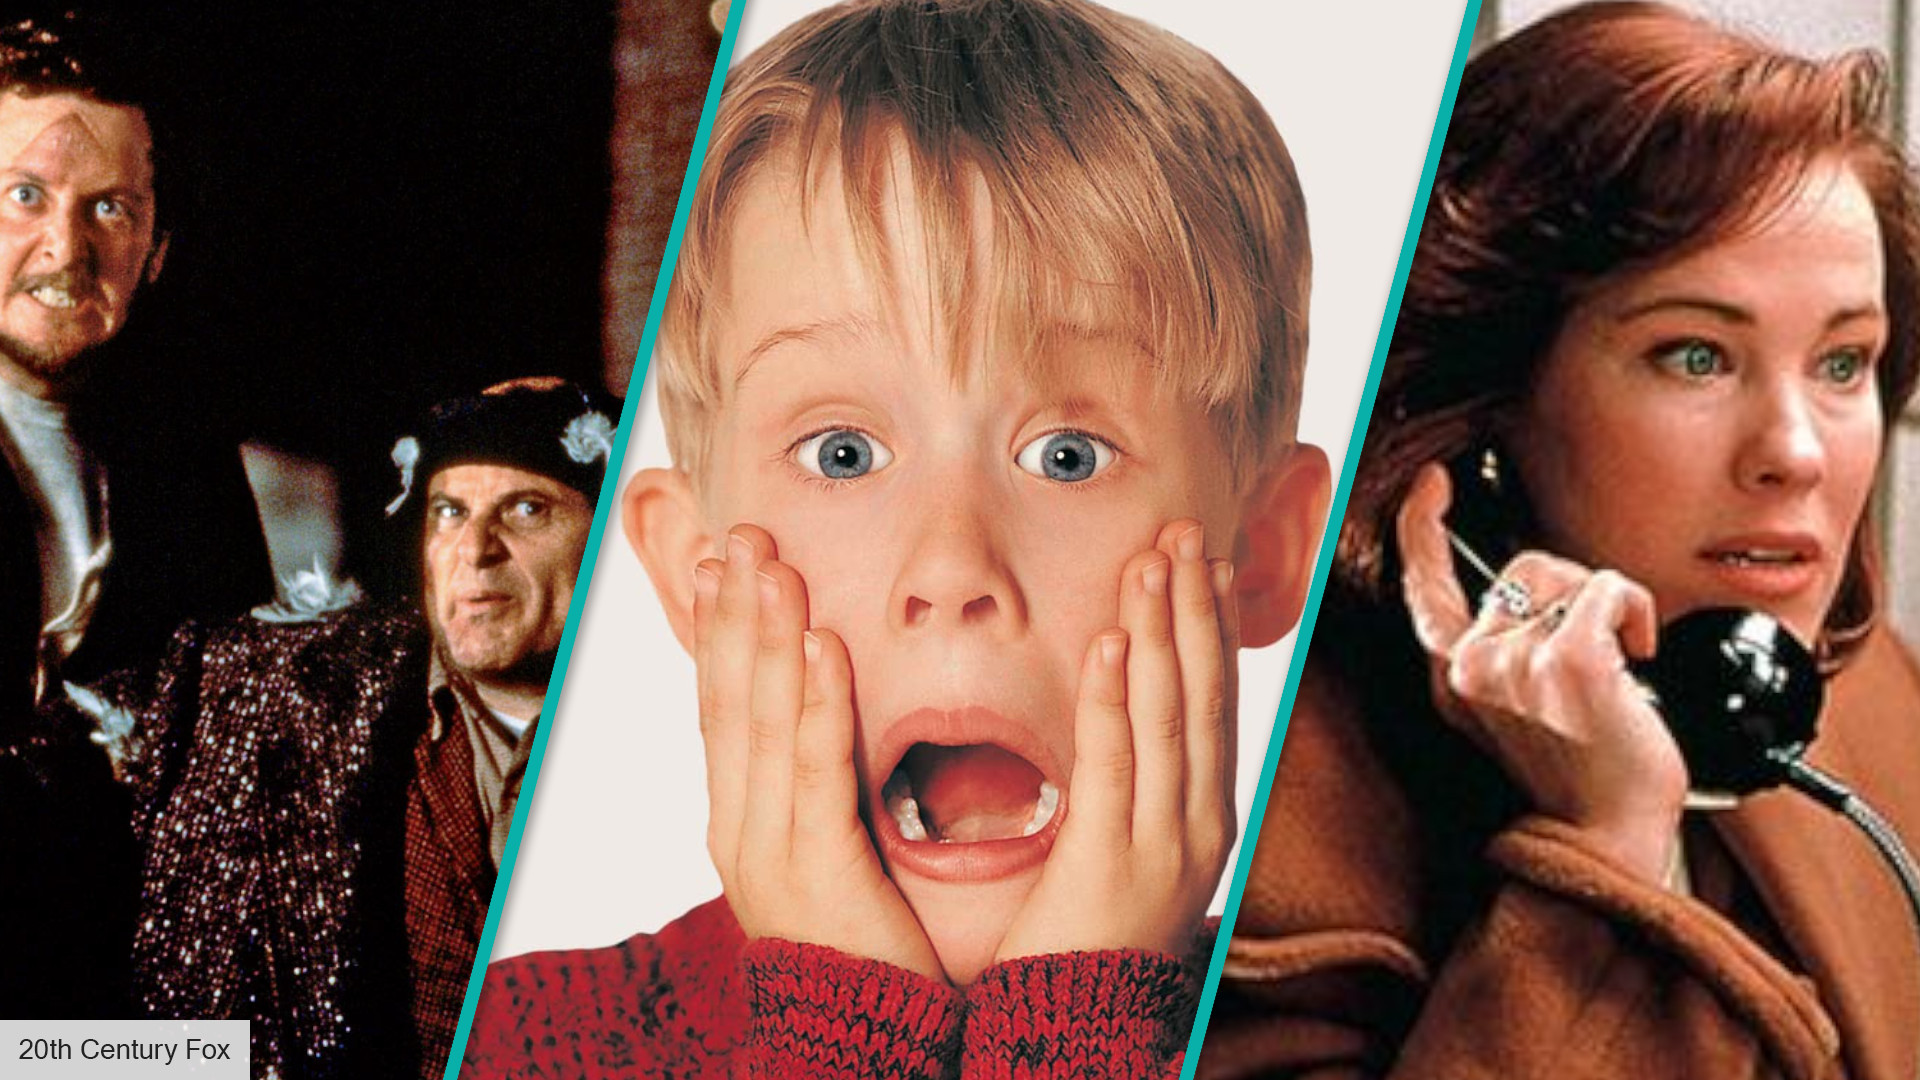 Home Alone cast, where are they now? The Digital Fix